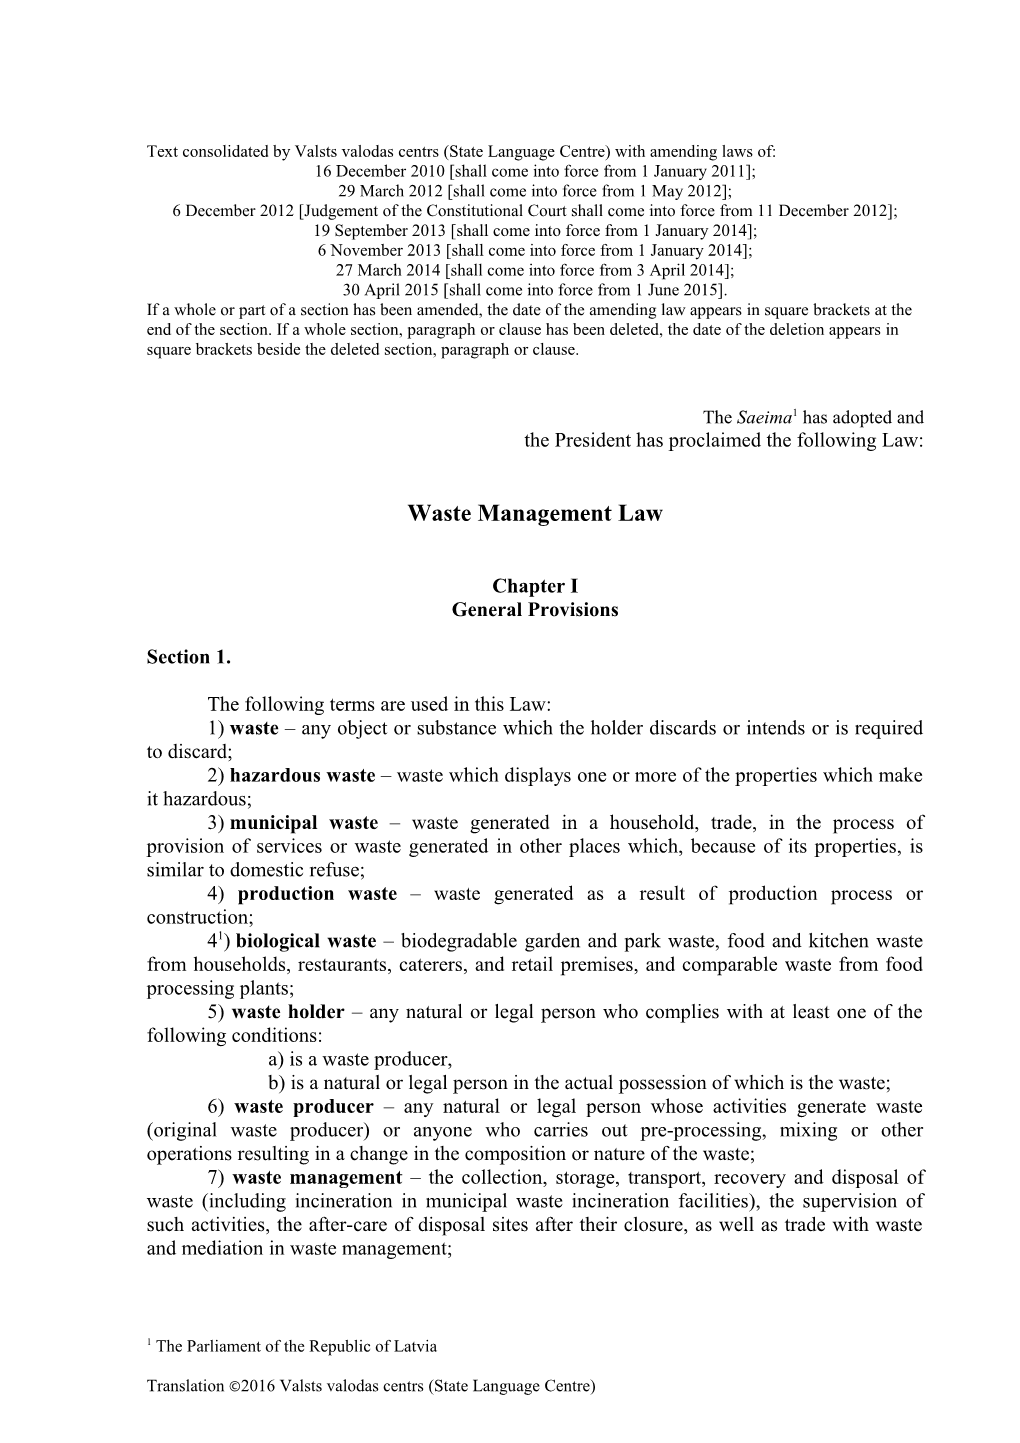 Text Consolidated by Valsts Valodas Centrs (State Language Centre) with Amending Laws Of s8